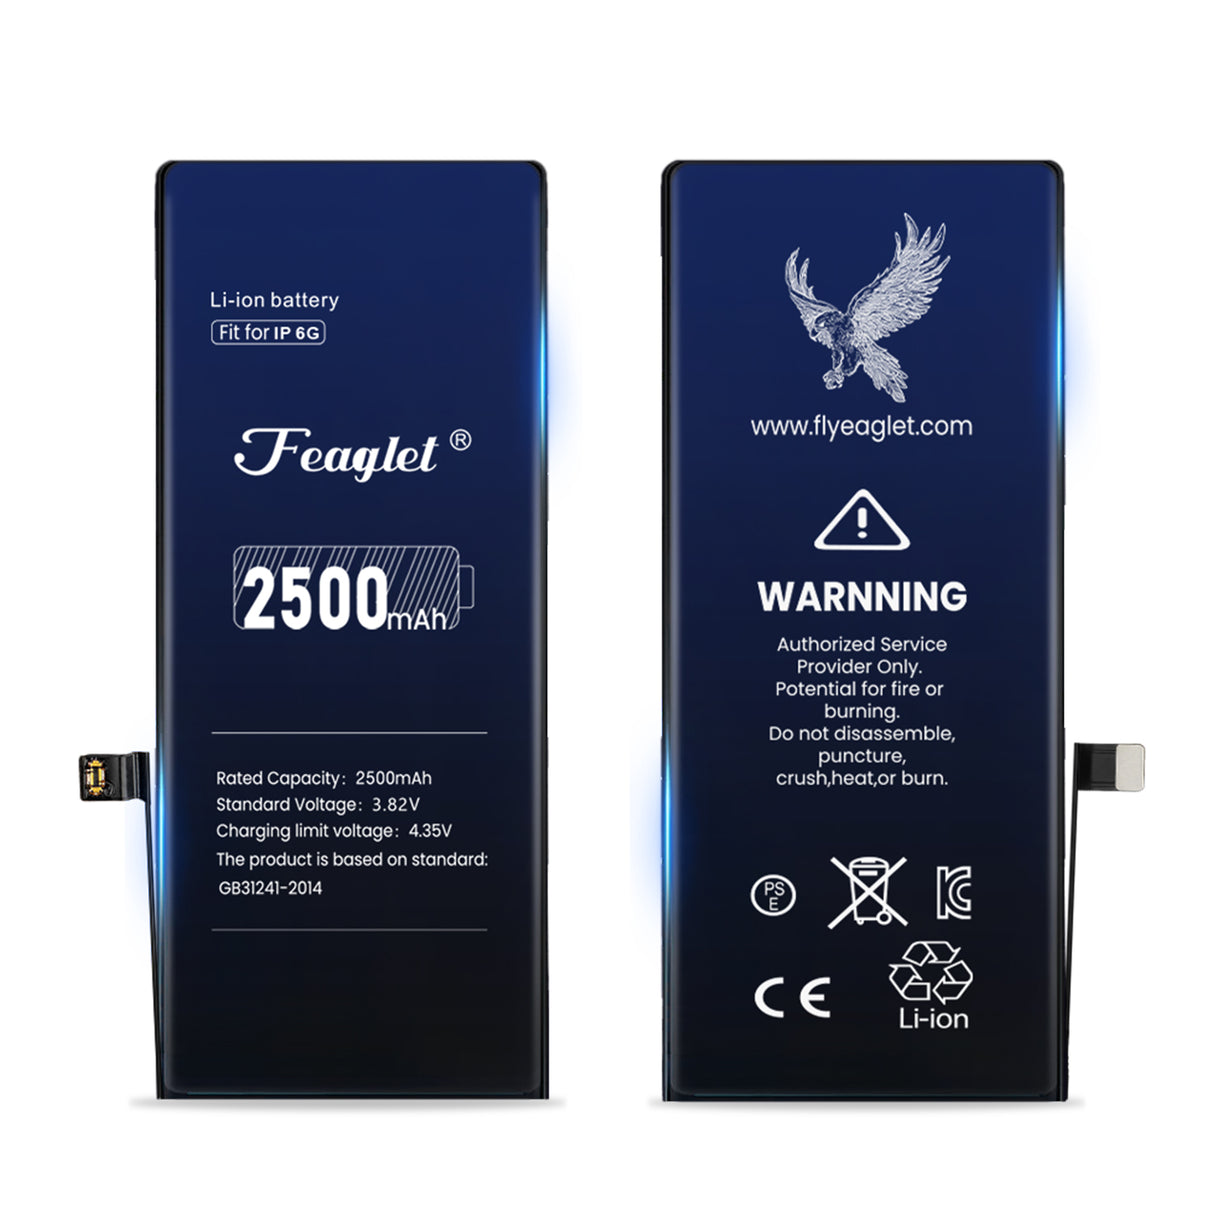 High Capacity iPhone 6 Battery Replacement Original BMS Low Impedance & 800 Cycles Maximum | 2500mAh|-Fly Eagle Feaglet Battery